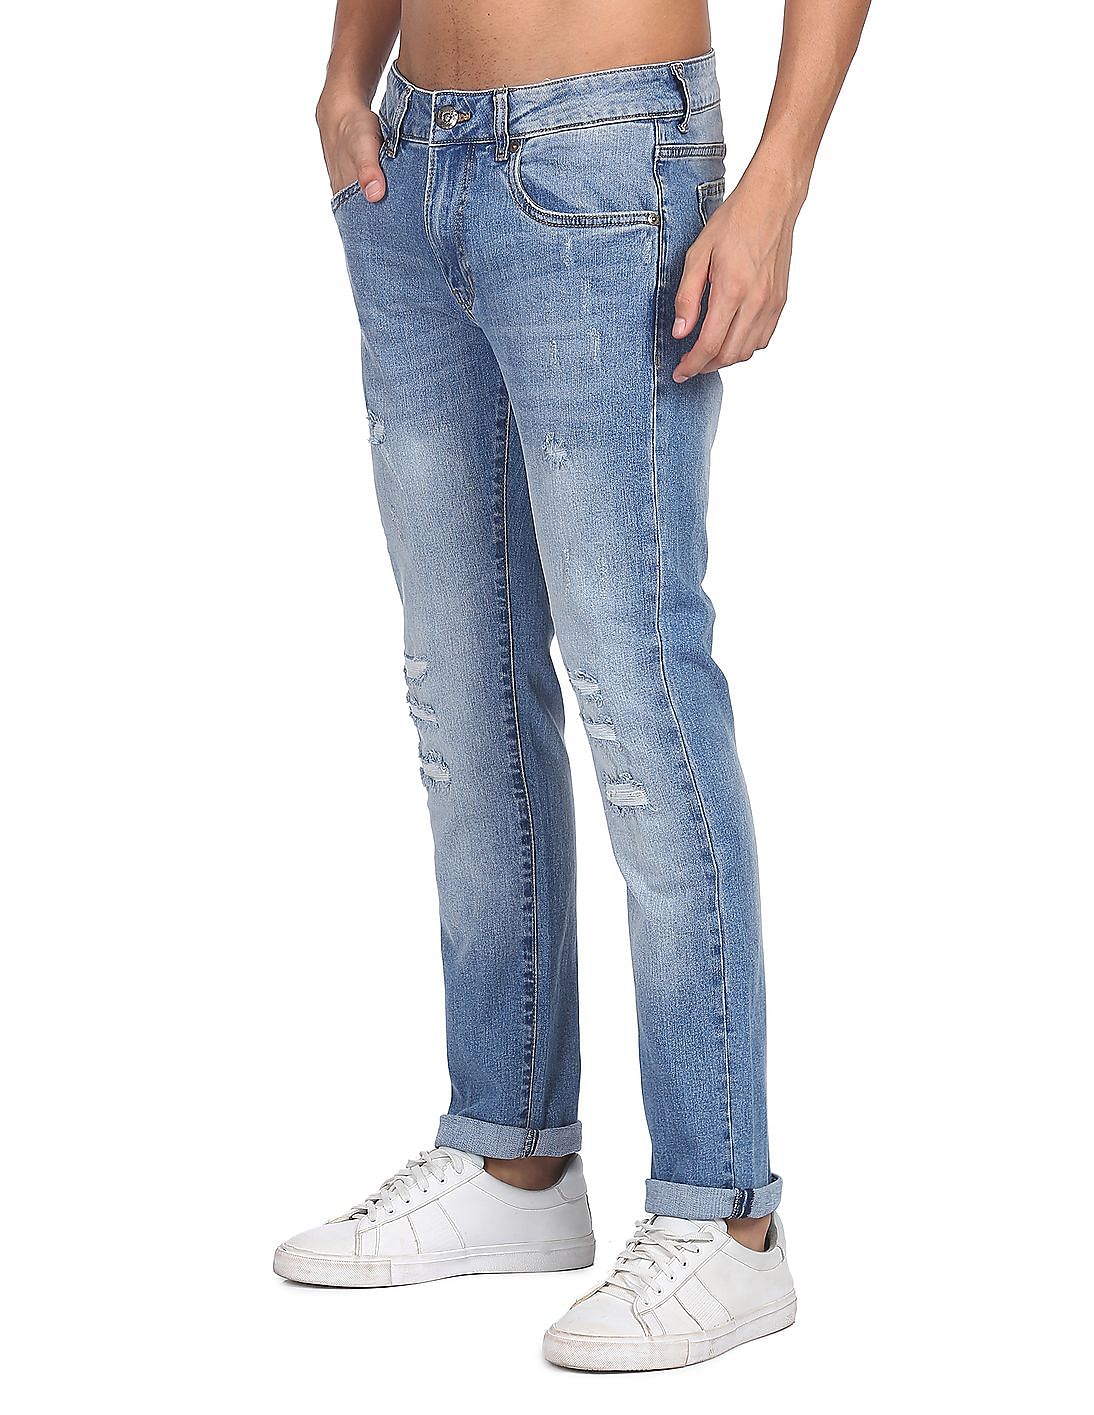 Blue Washed Skinny Jeans Slim Fit Heavy Distressed Denim Jeans Men  China  Jeans and Clothing price  MadeinChinacom